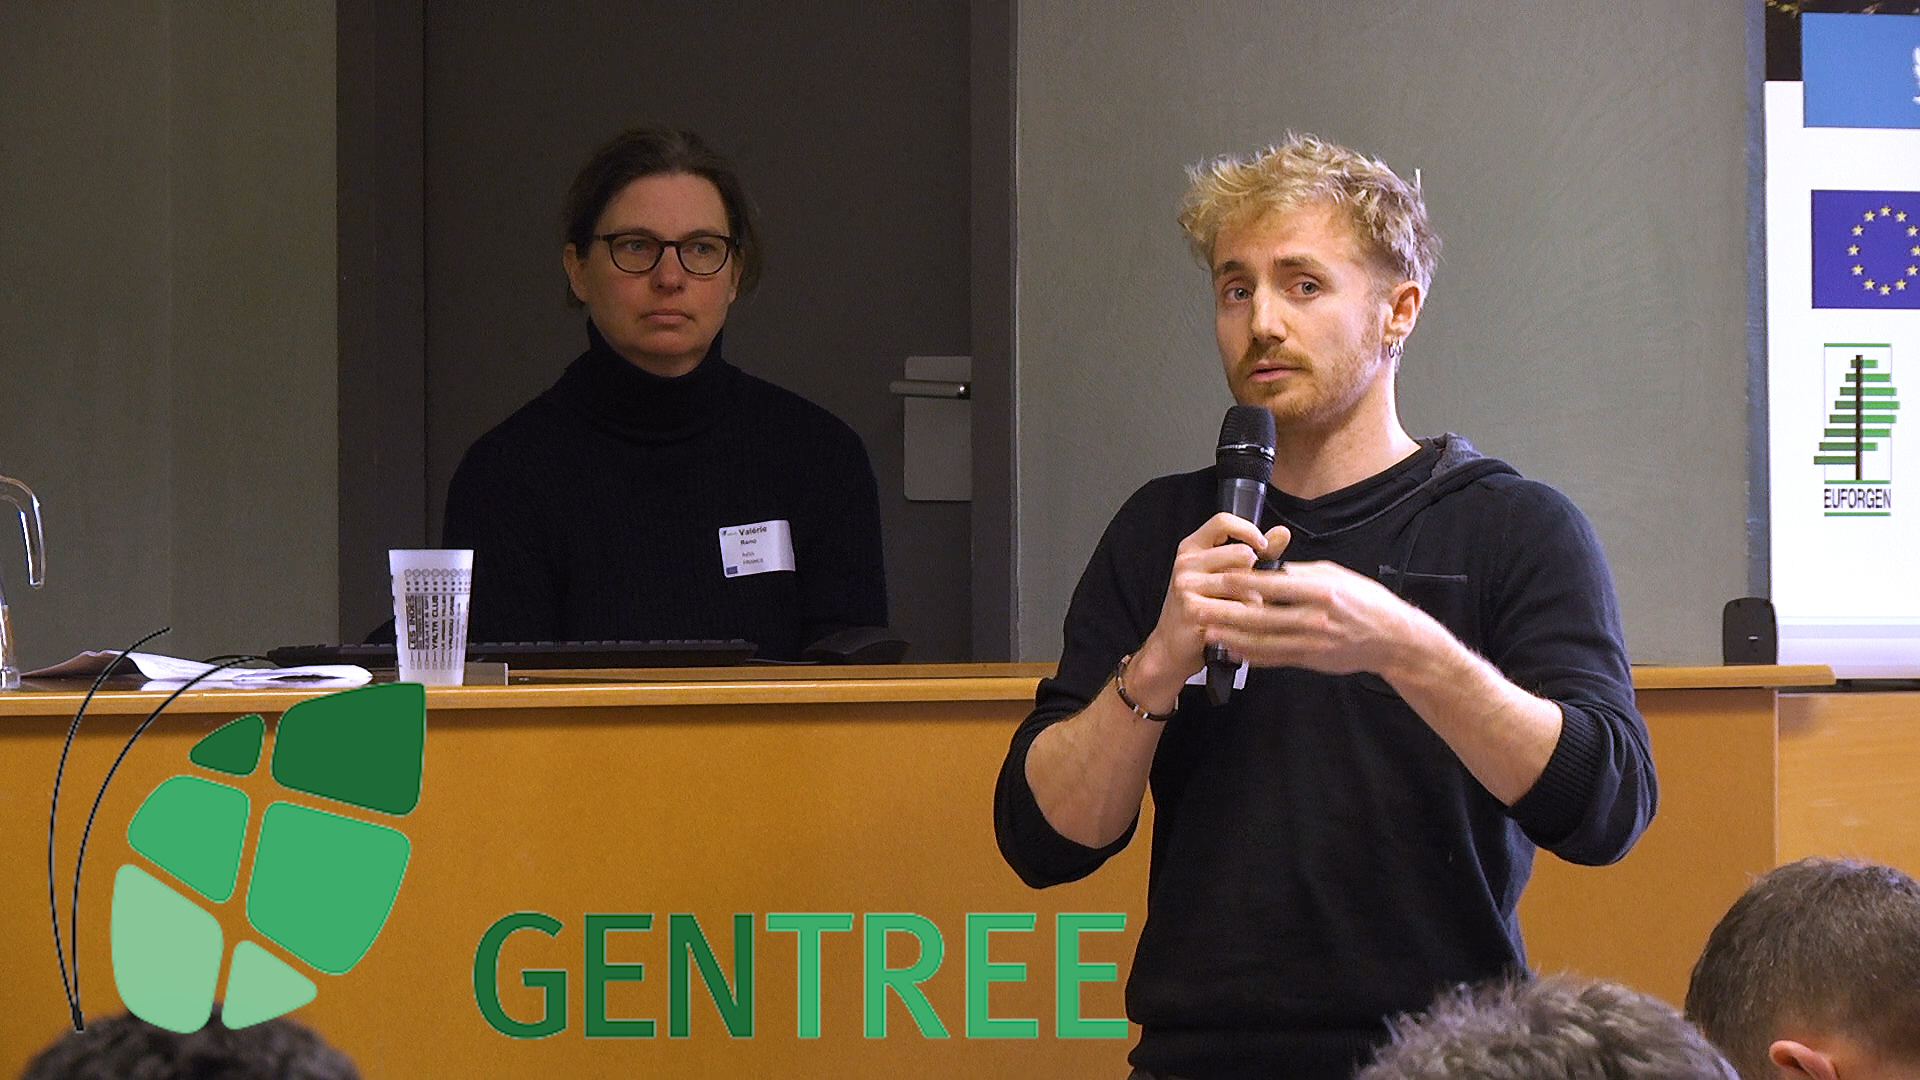 [COLLOQUE] GENTREE Final Conference 27-31 January 2020 séance 12